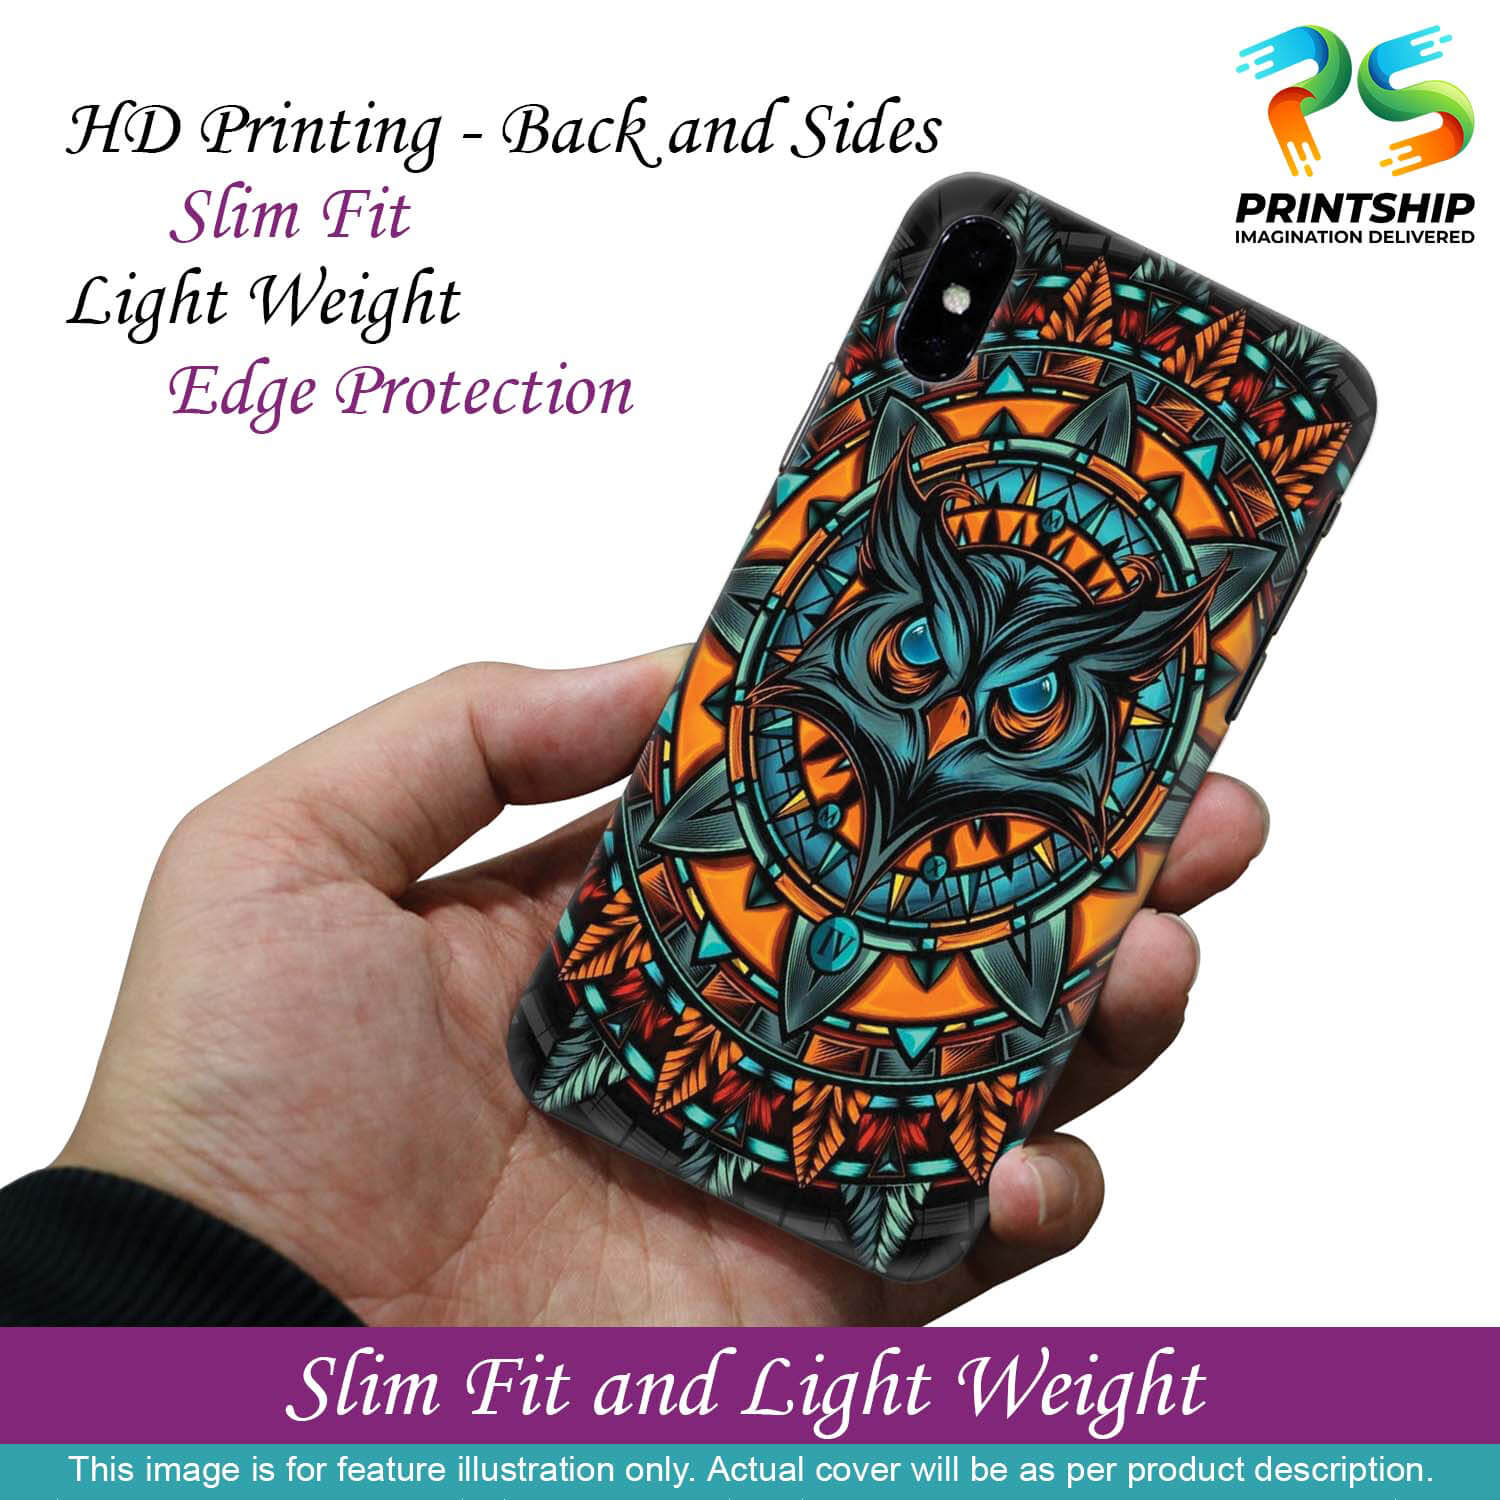 PS1338-Premium Owl Back Cover for Oppo A53